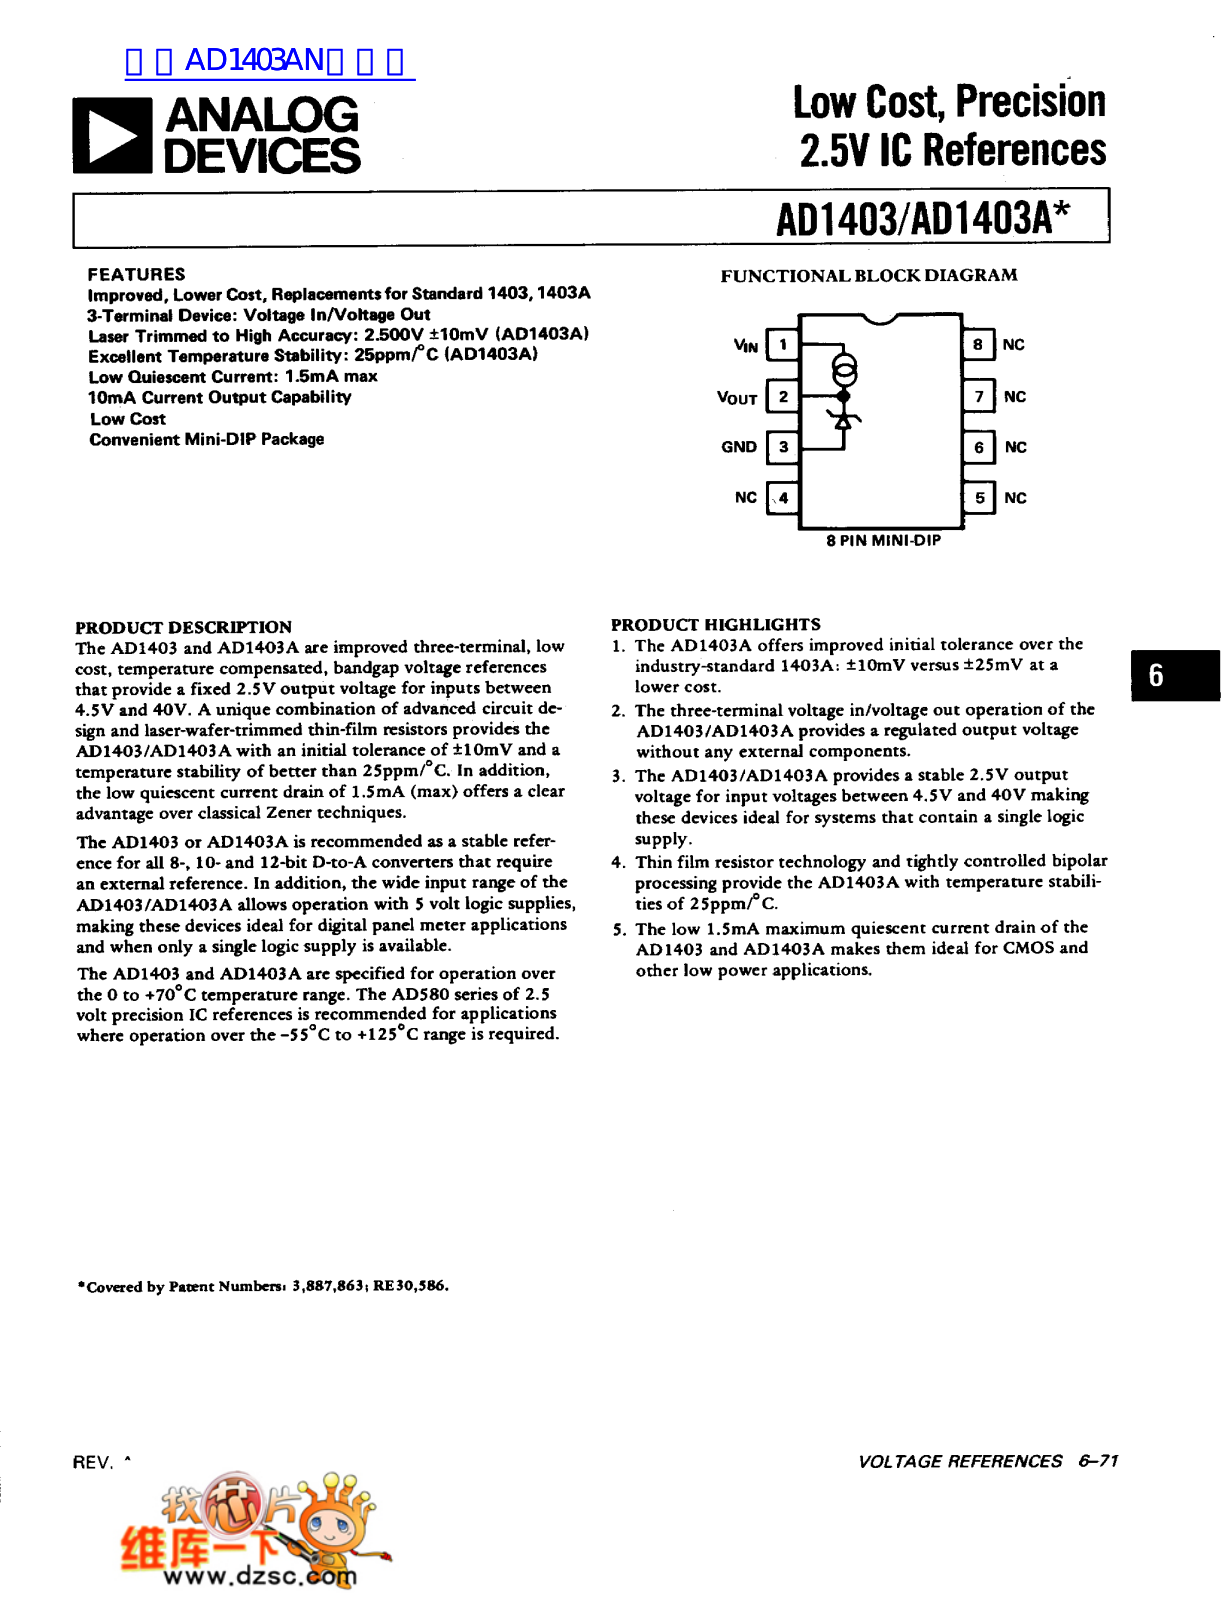 ANALOG DEVICES AD1403, AD1403A Service Manual